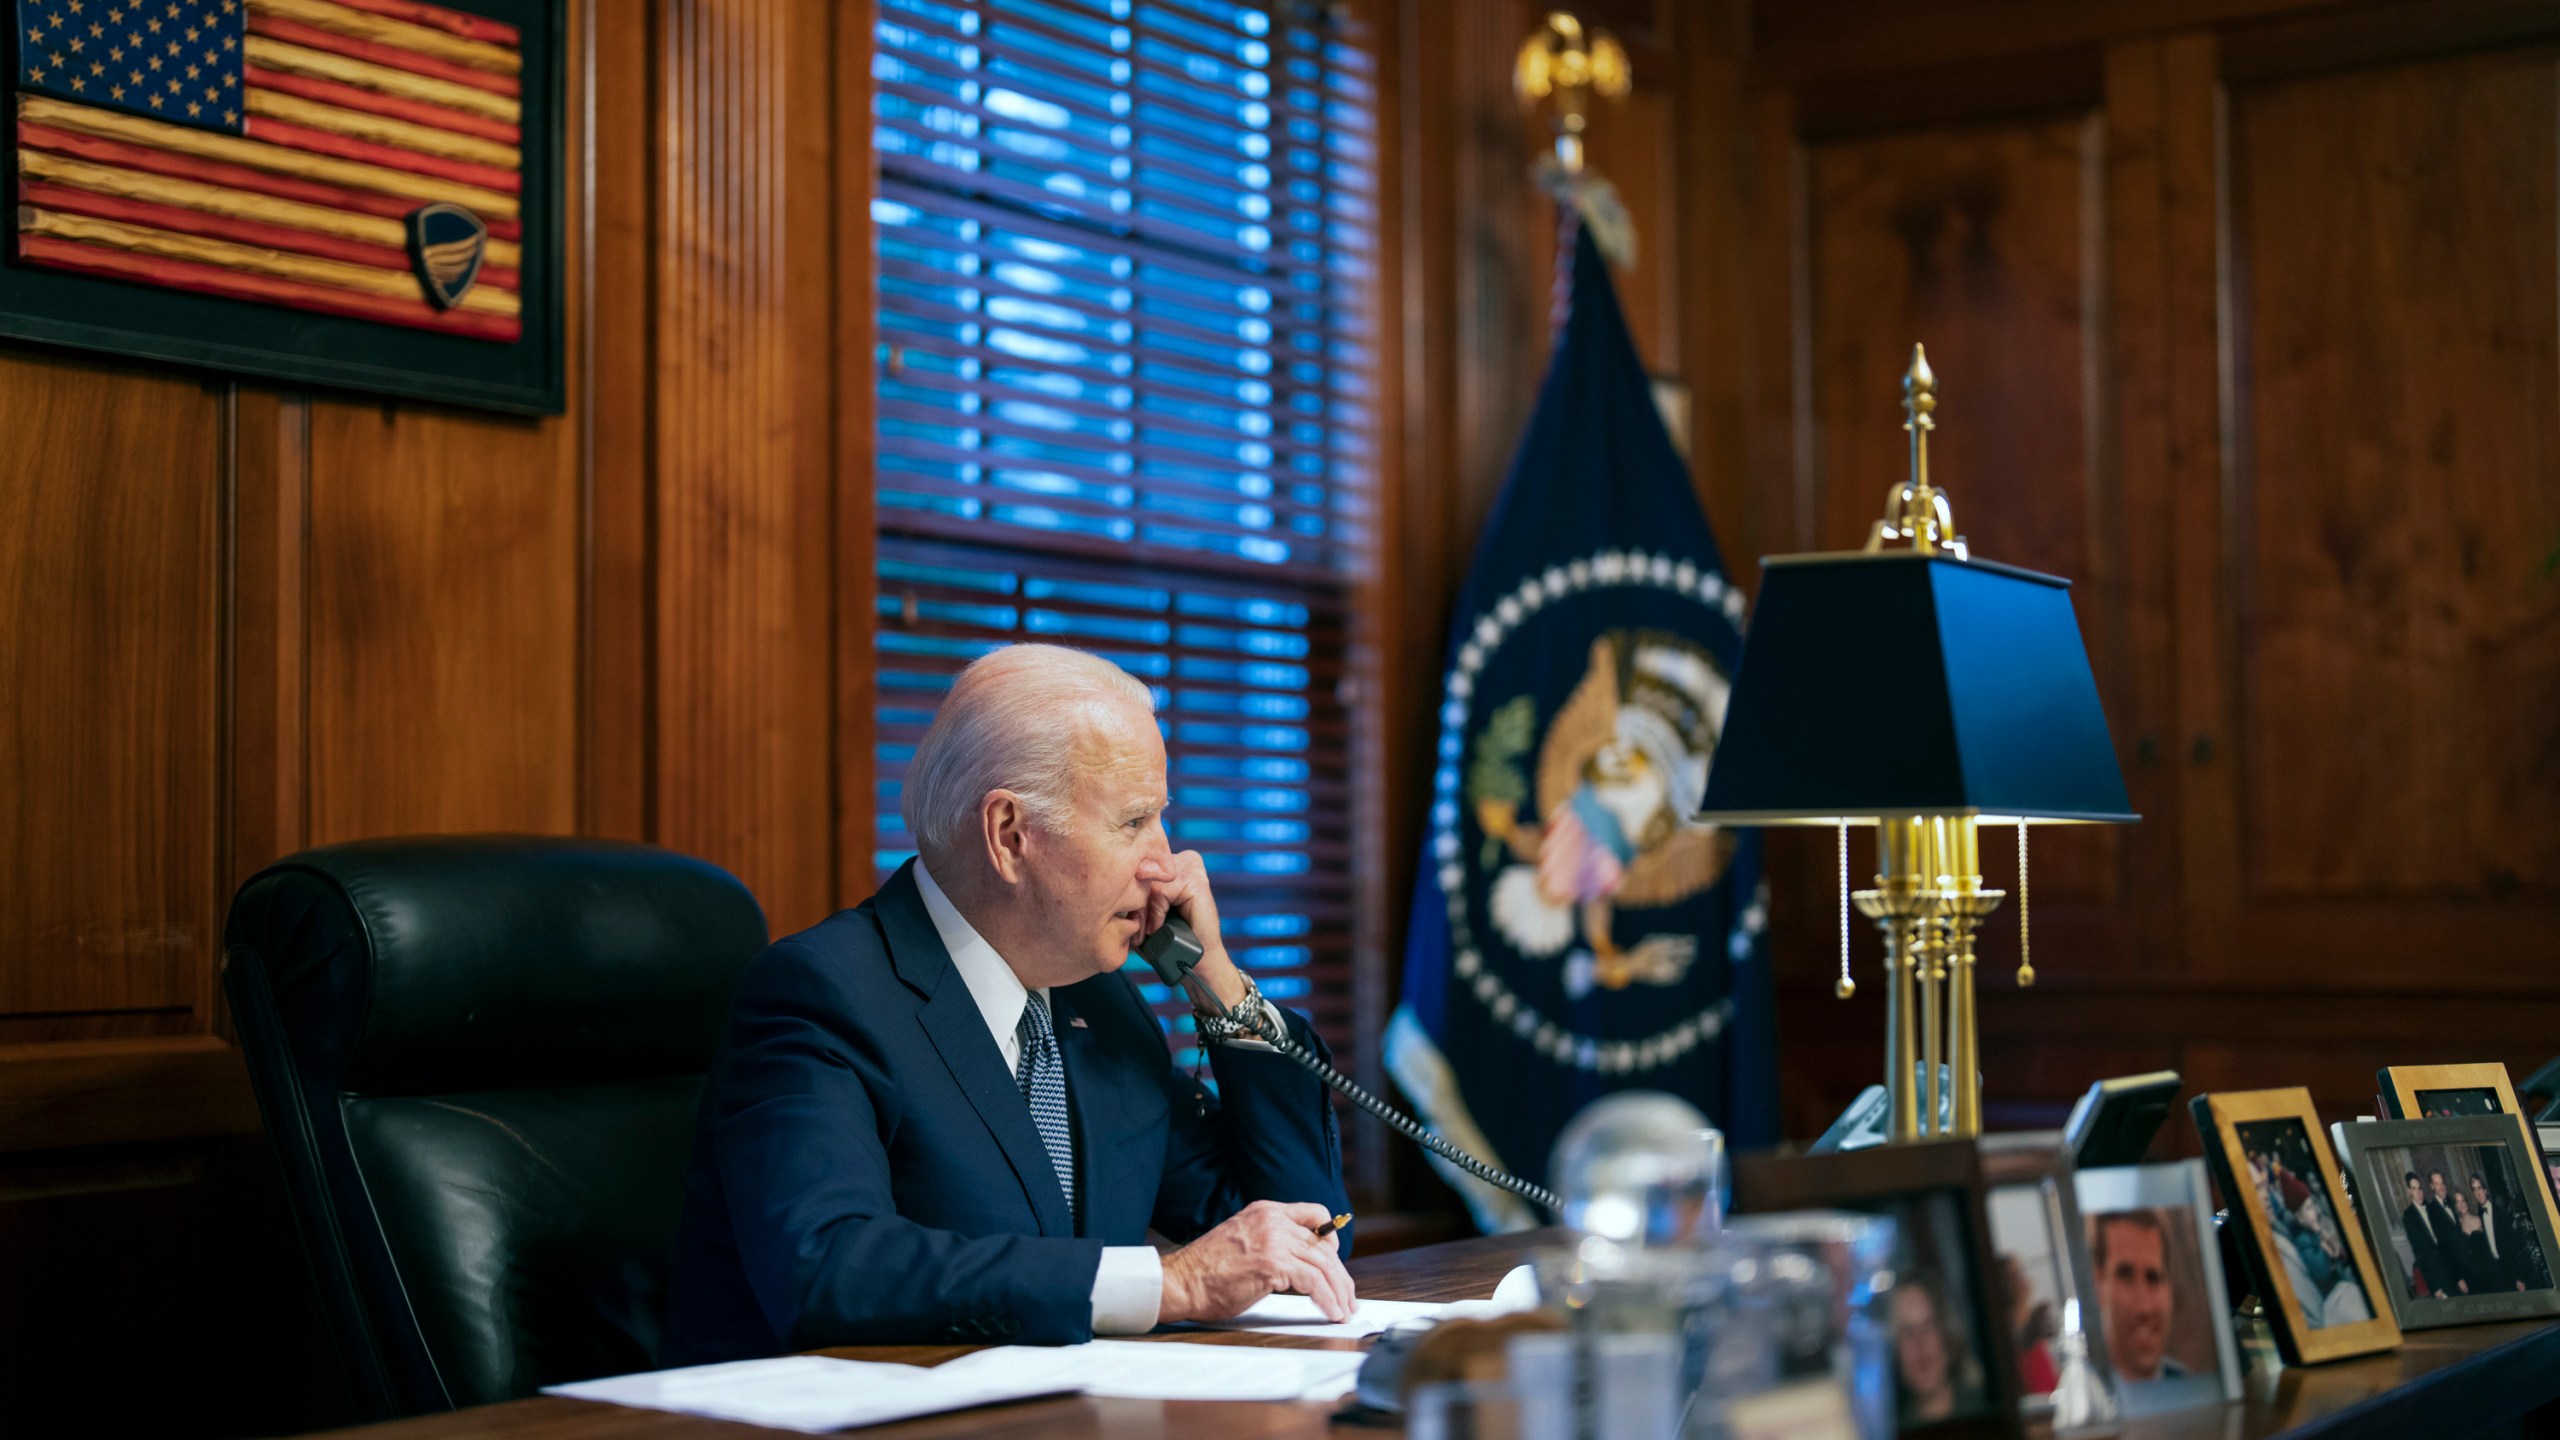 FILE - In this image provided by The White House, President Joe Biden speaks with Russian President Vladimir Putin on the phone from his private residence in Wilmington, Del., Dec. 30, 2021. Biden's sprawling home outside downtown Wilmington, has a special place in his heart. When he met special prosecutor Robert Hur to talk about the sensitive documents he’d improperly kept after his vice presidency, Biden told Hur three times he is a “frustrated architect.” (Adam Schultz/The White House via AP, File)